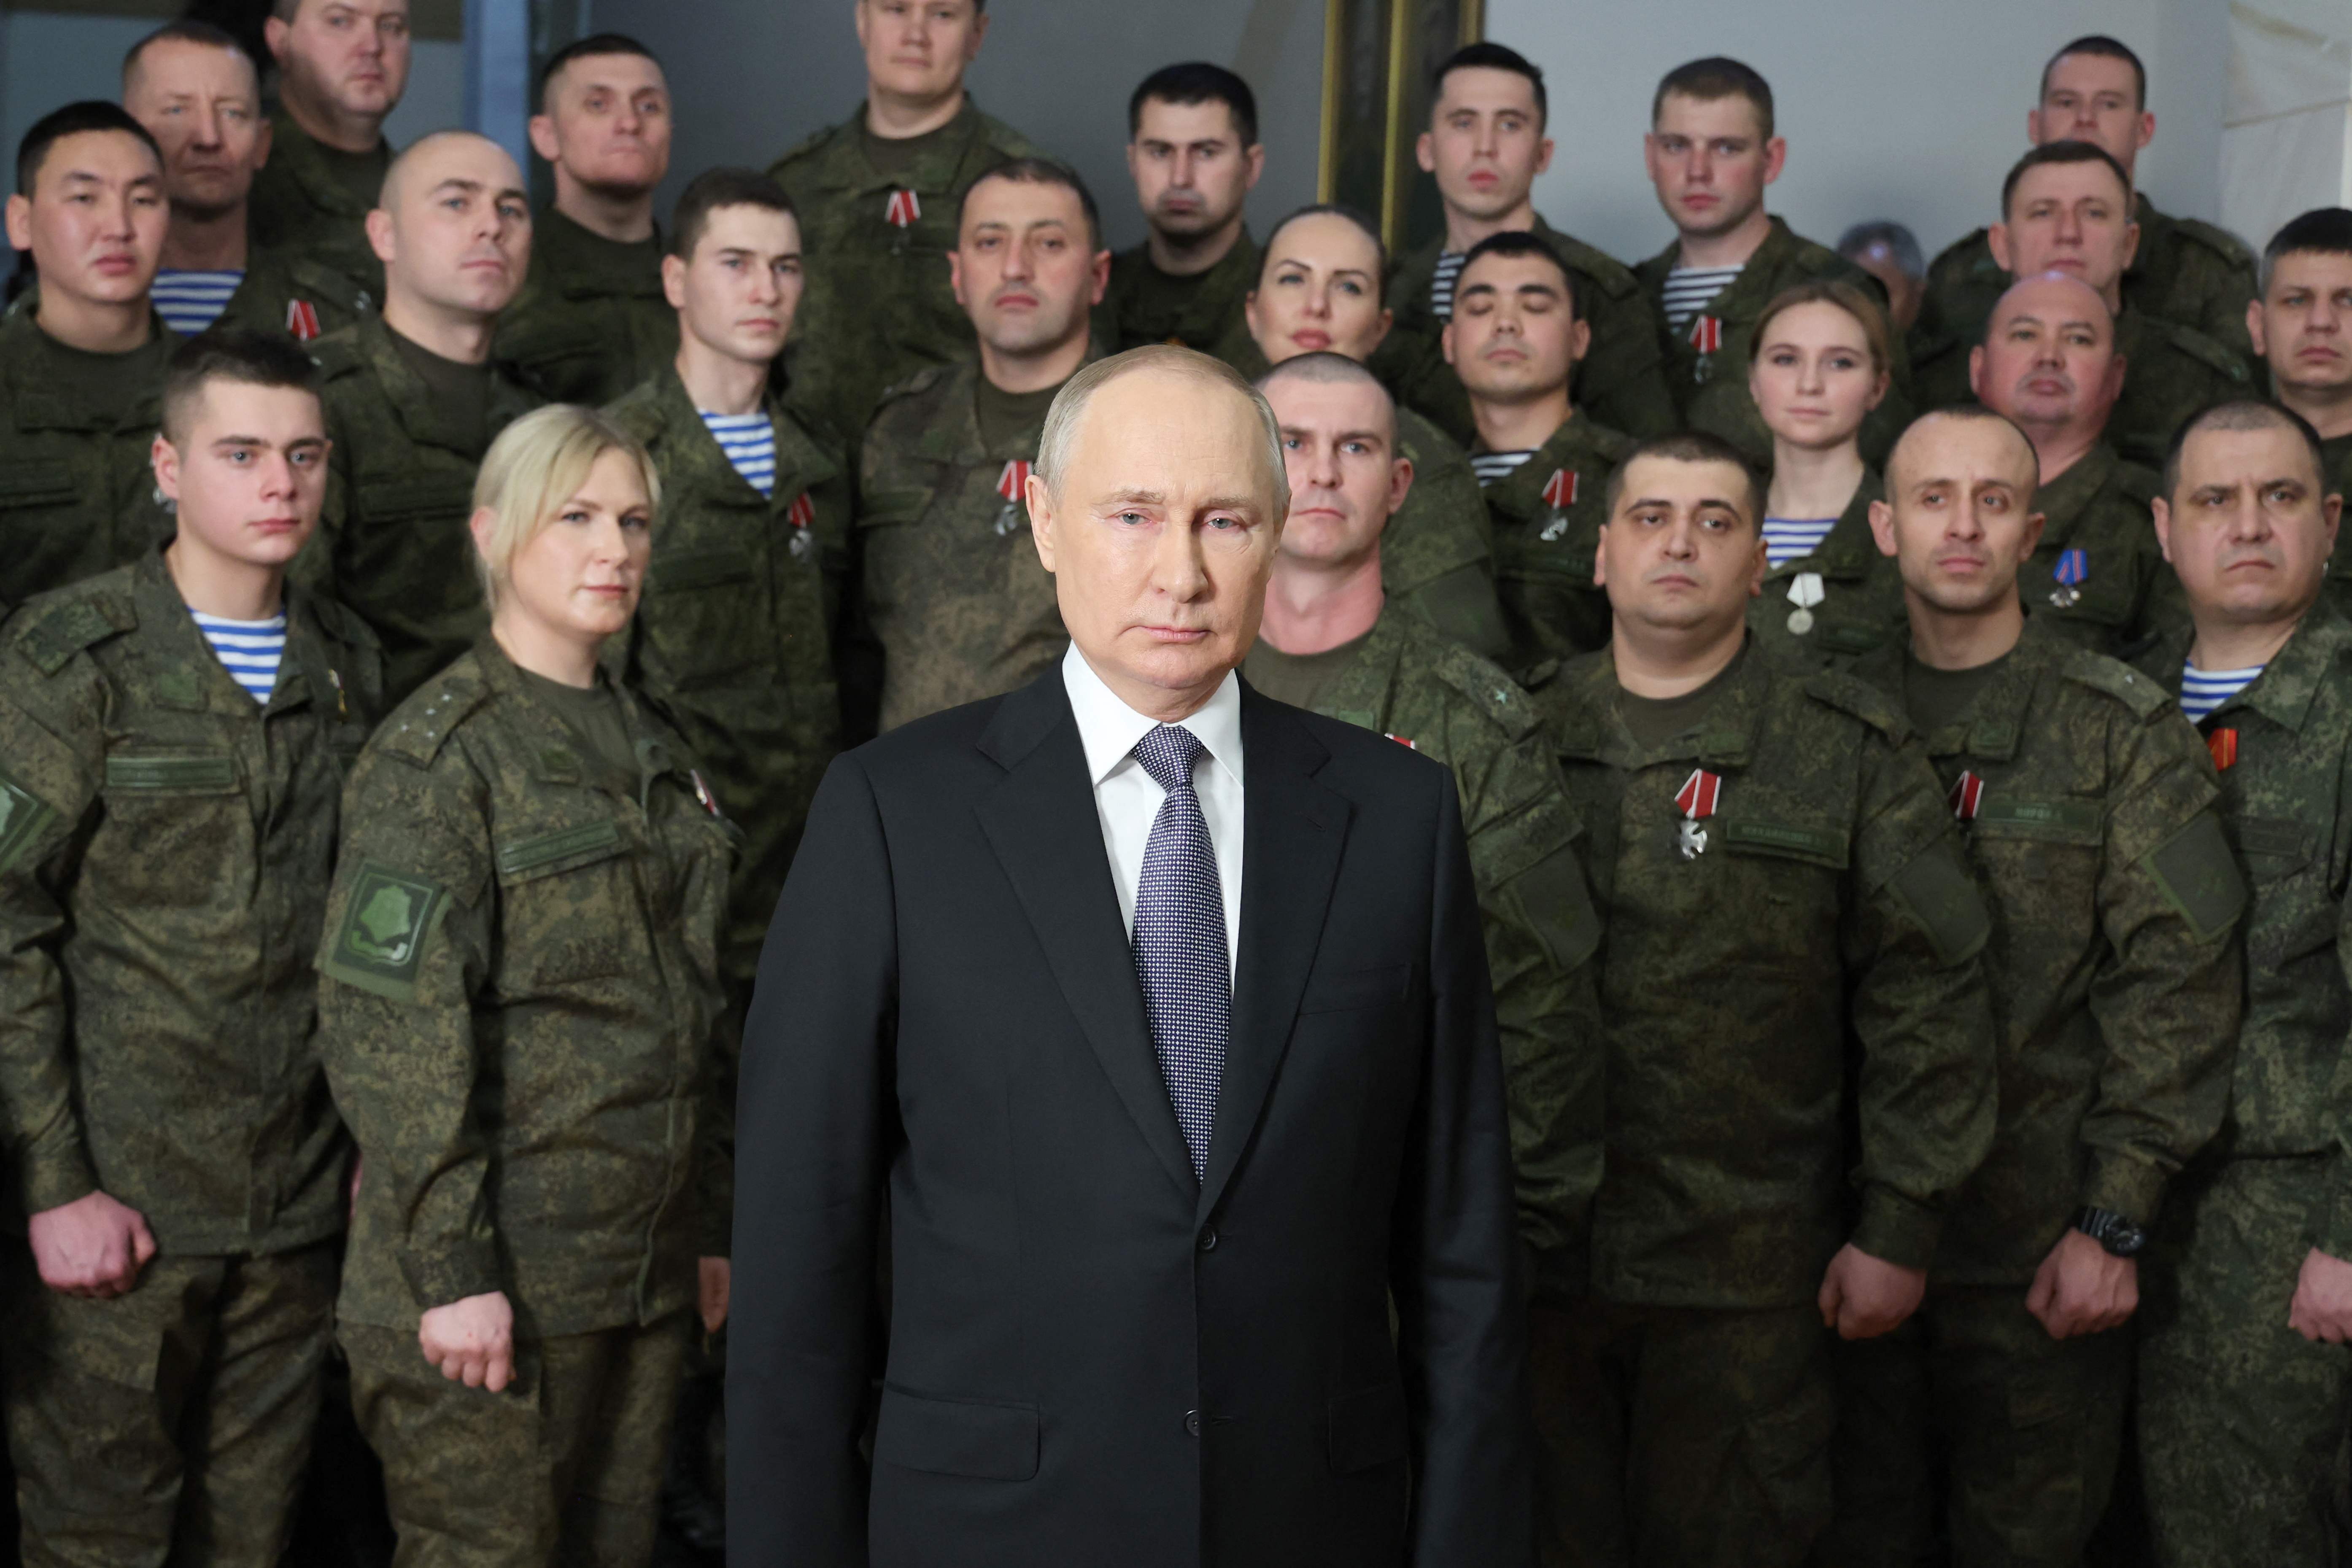 Vladimir Putin has always sought to project an image of strength, reality or not